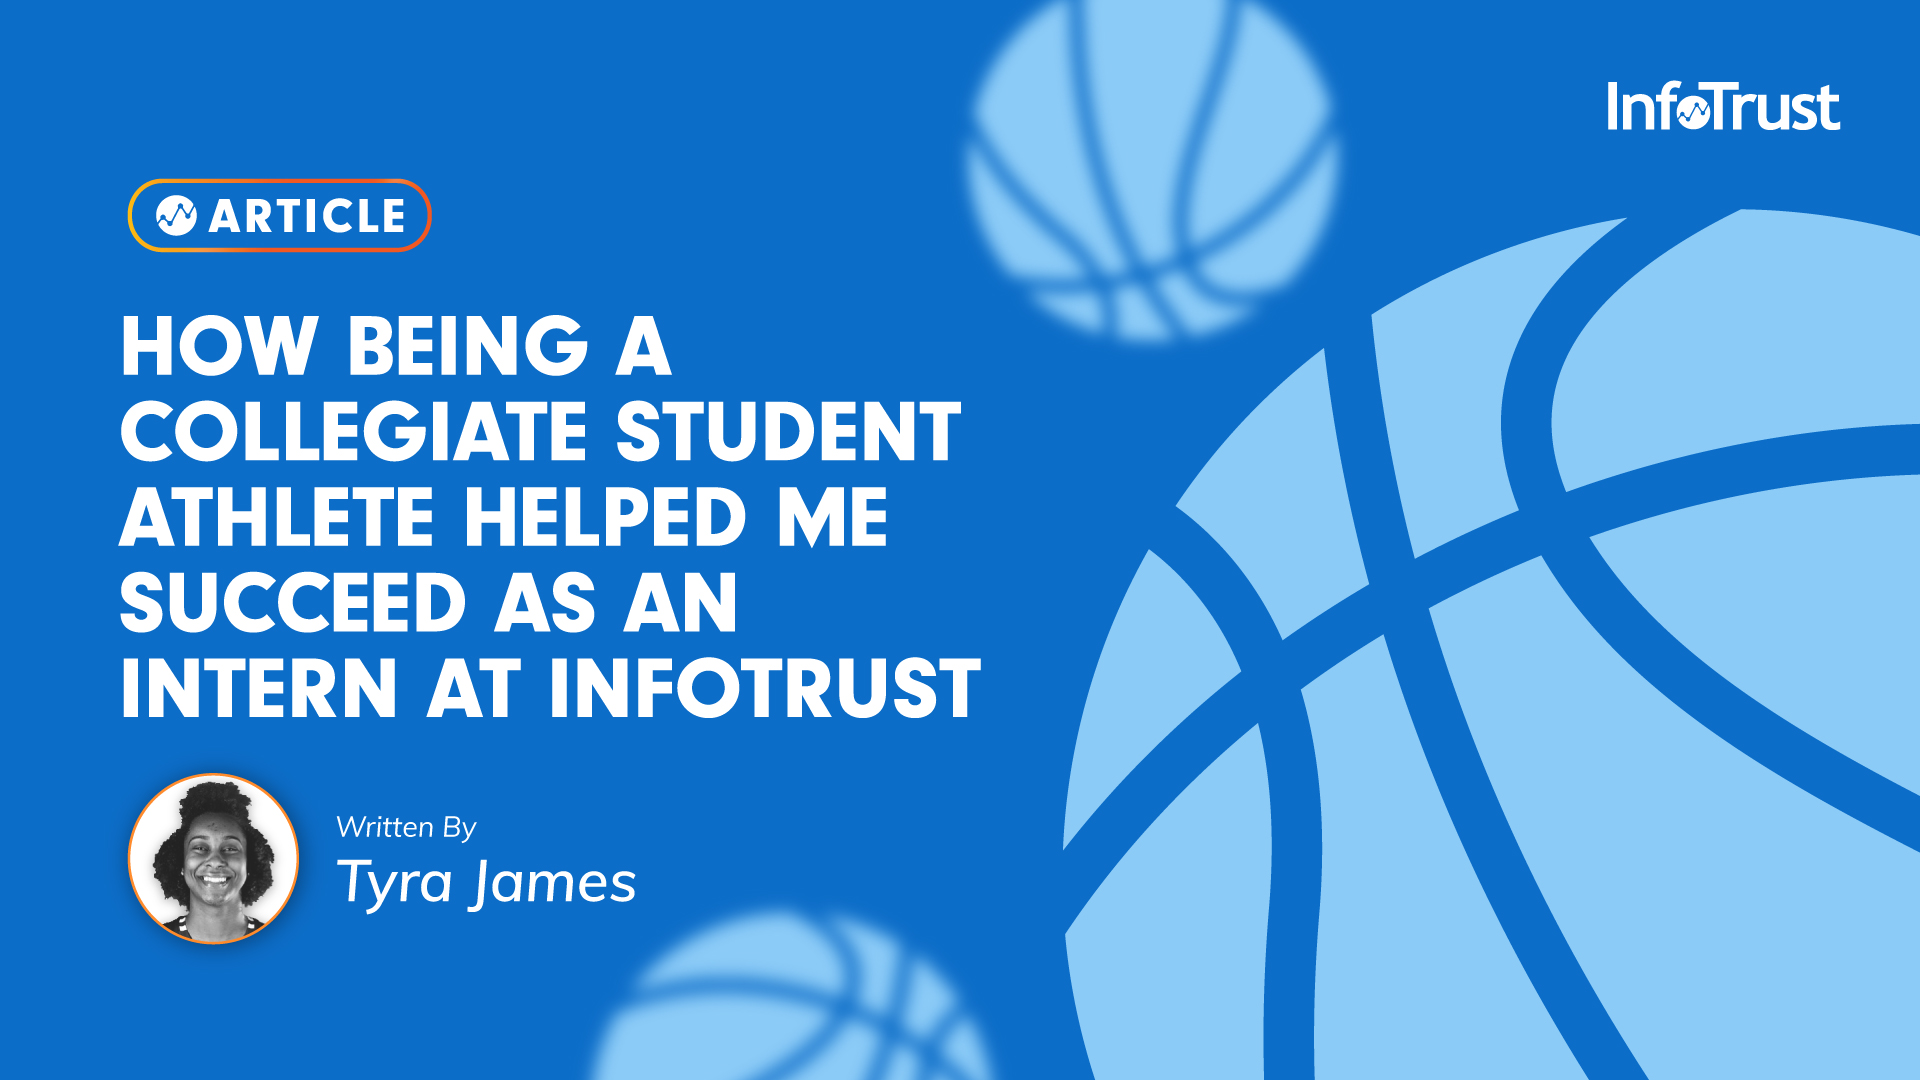 How Being a Collegiate Student Athlete Helped Me Succeed as an Intern at InfoTrust